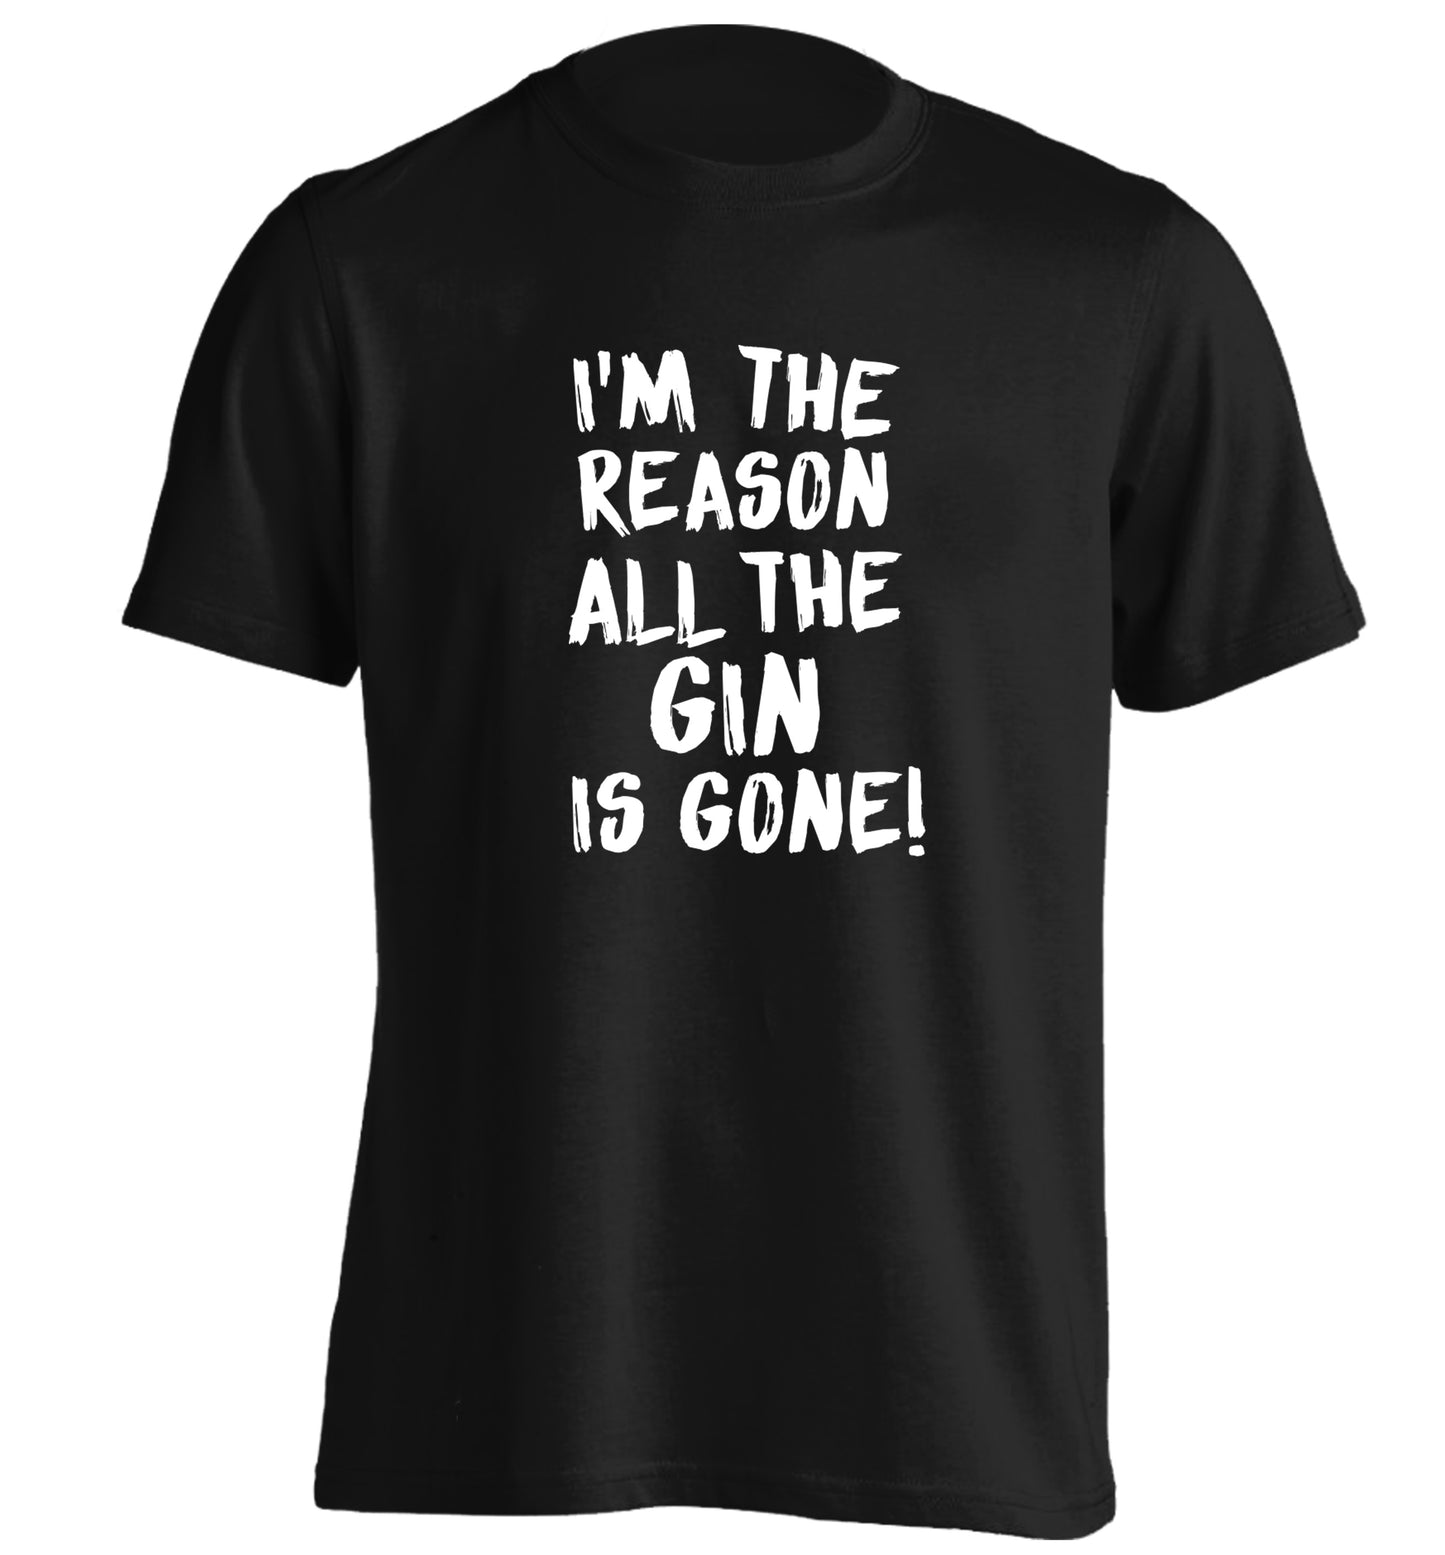 I'm the reason all the gin is gone adults unisex black Tshirt 2XL